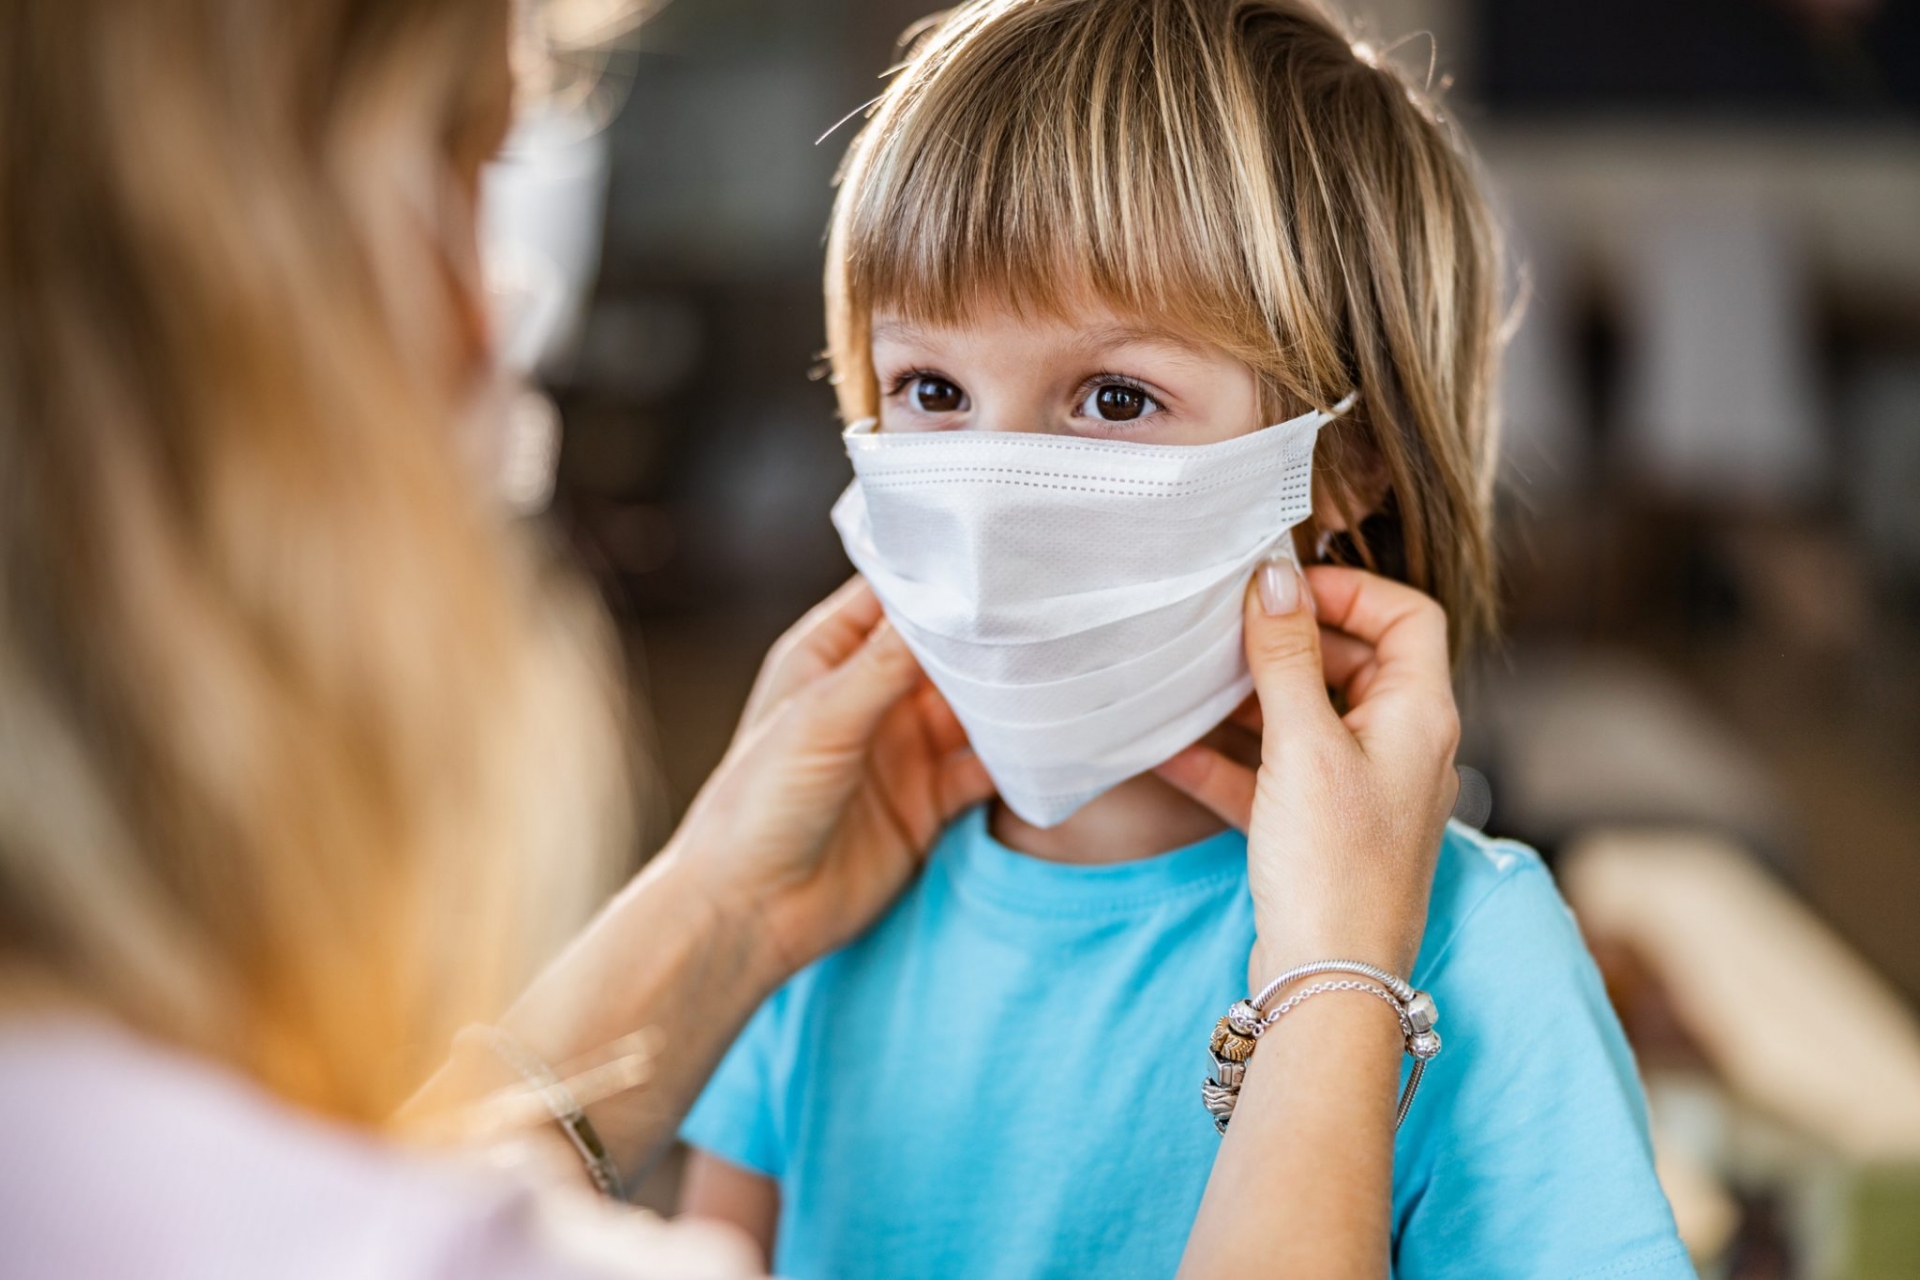 Children 5 and under should not be made to wear masks during the coronavirus pandemic